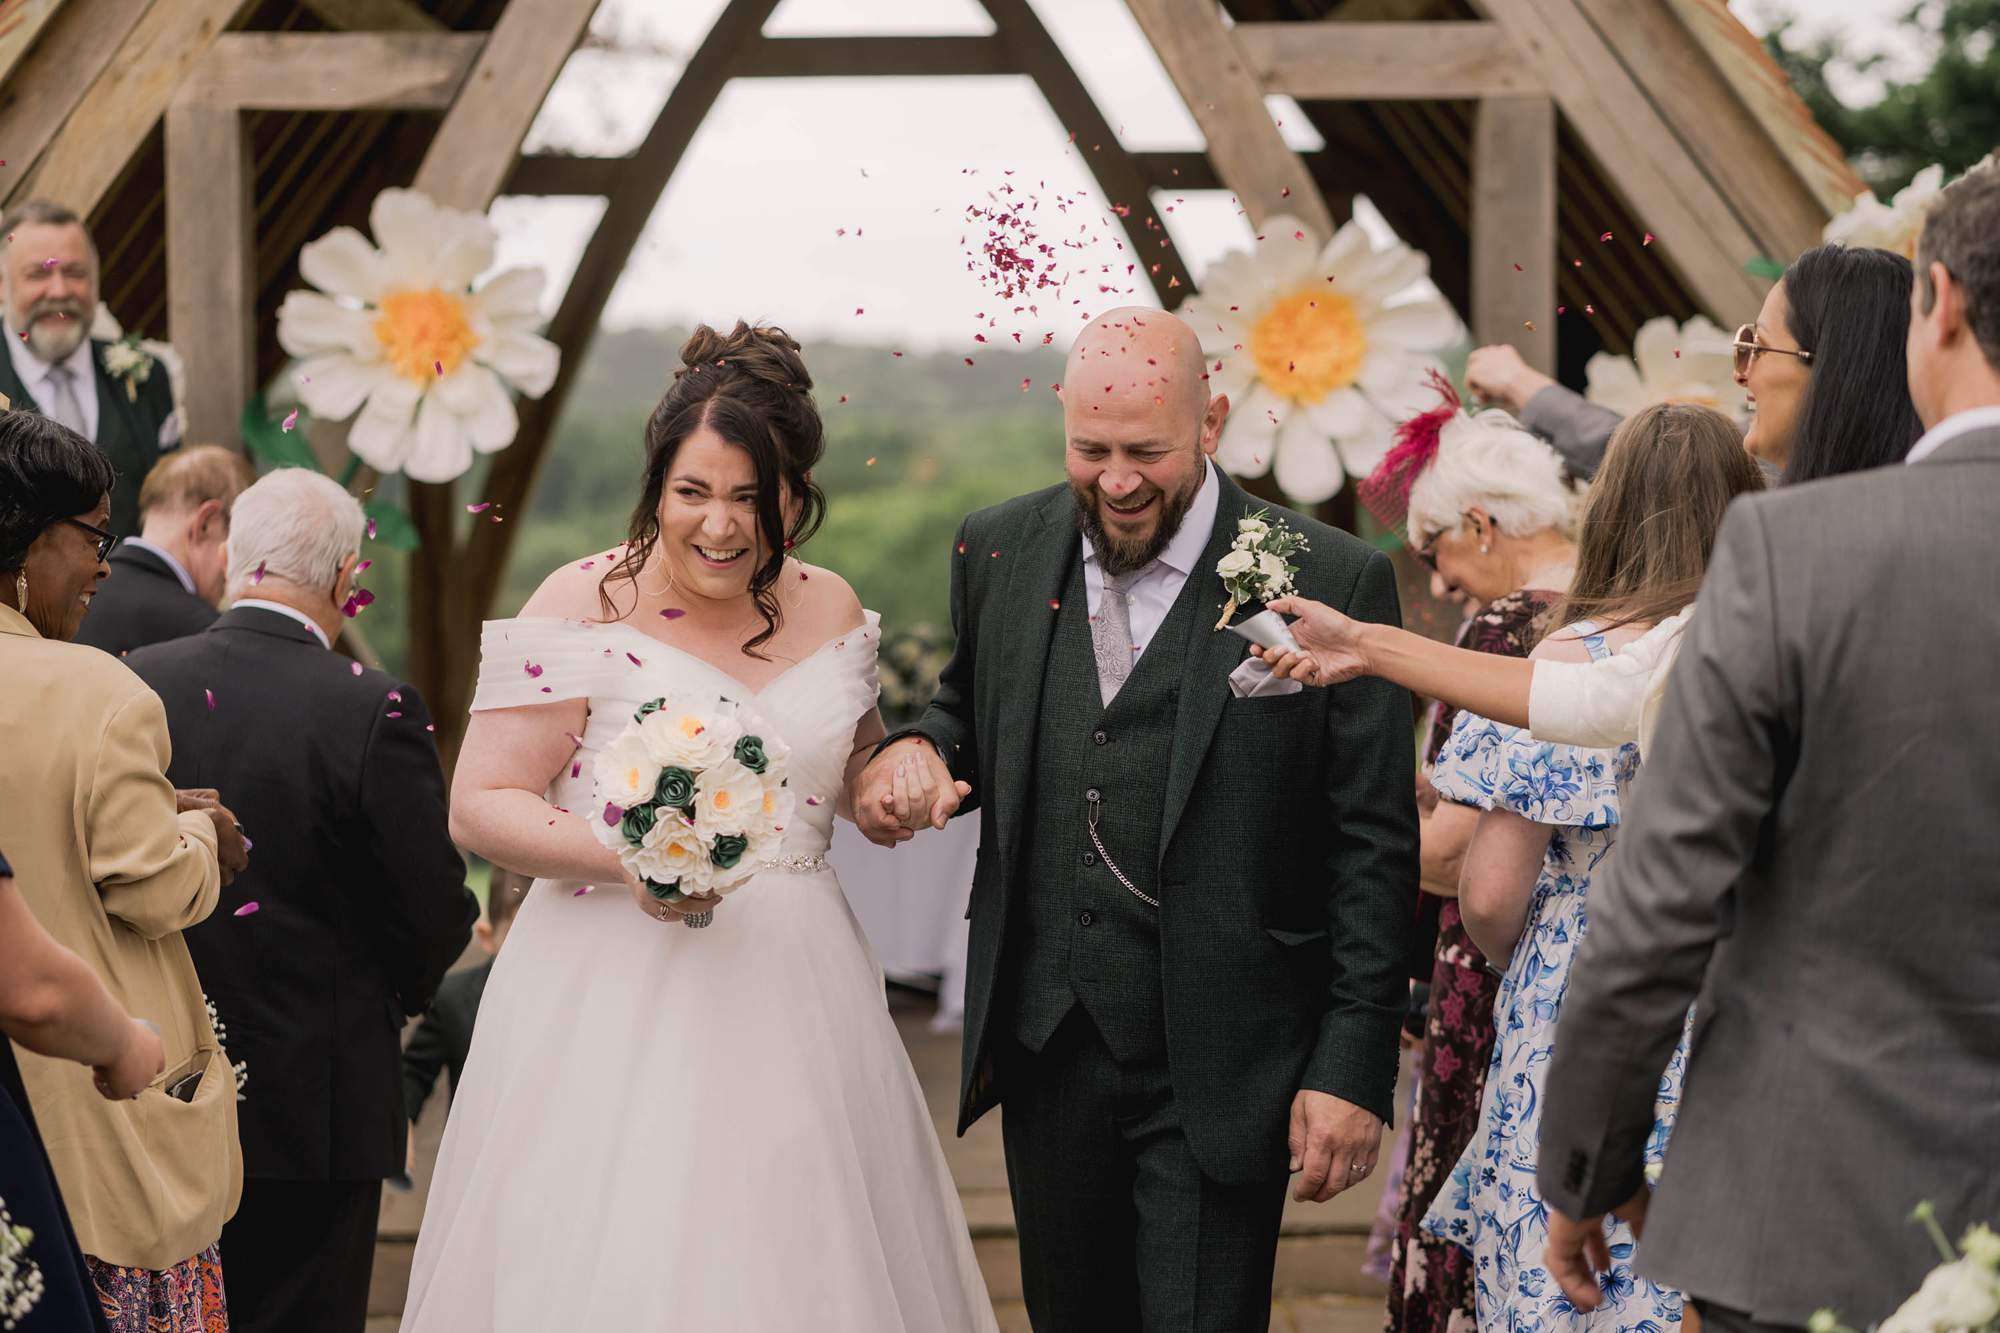 Outdoor ceremony with bride and groom running through the confetti line at Highley Manor wedding venue in Sussex.